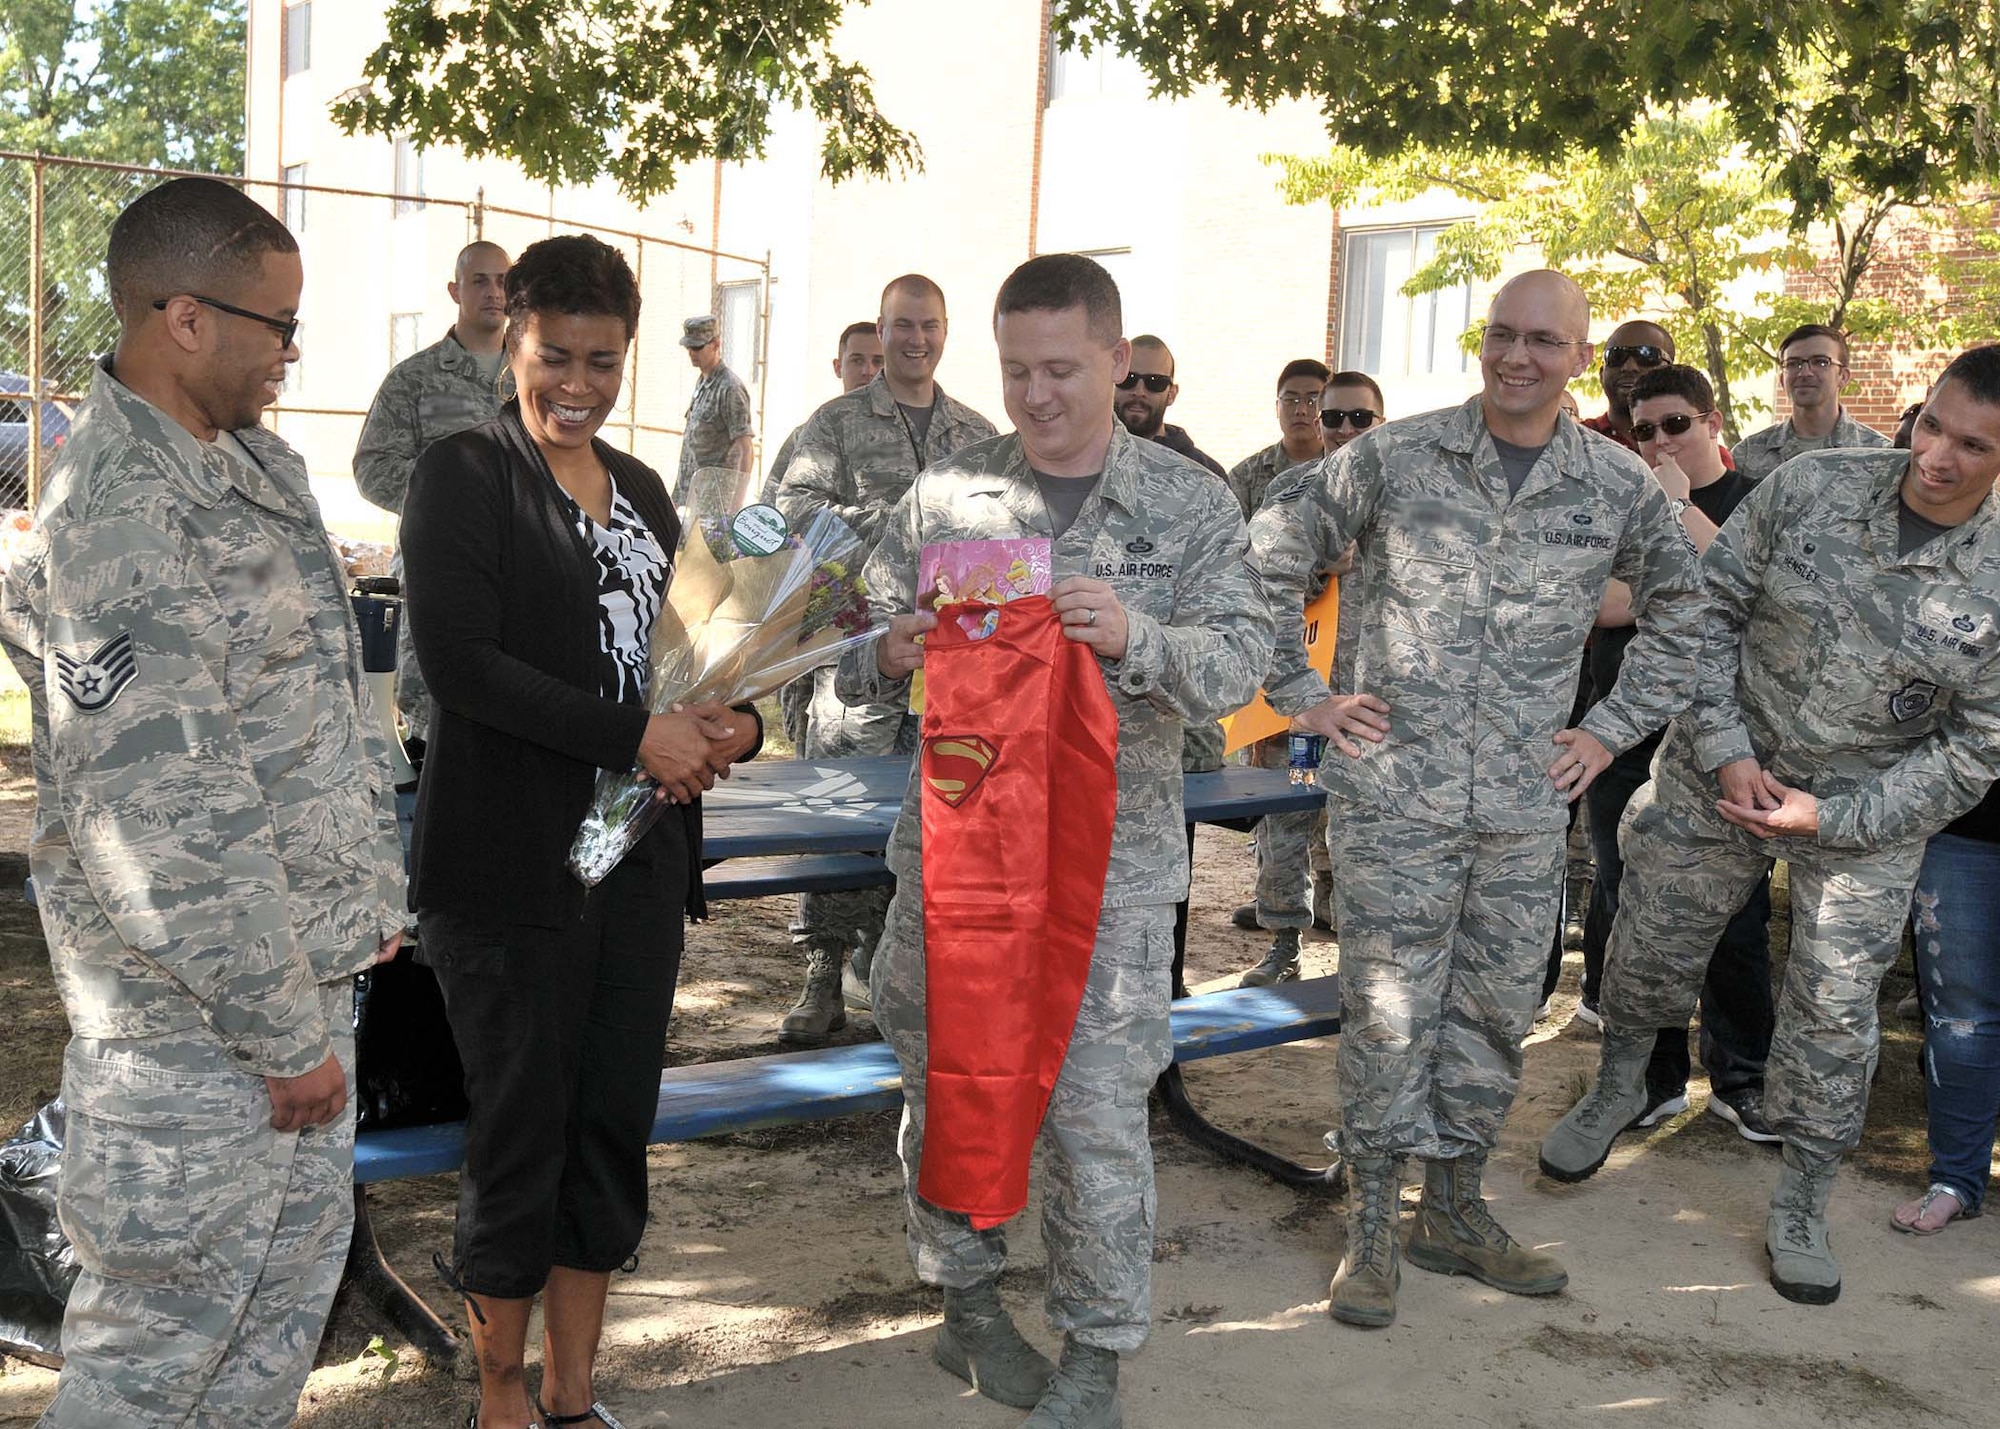 Staff Sgt. Rasheed, 7th Intelligence Squadron, is greeted by Airmen from the 7th IS during a welcome back celebration Sep. 16, 2016, at Fort George G. Meade, Maryland. Rasheed suffered a cerebral aneurysm in 2015 and is currently working to return to his career field as an intelligence analyst. (U.S. Air Force photo/Tech. Sgt. Veronica Pierce)